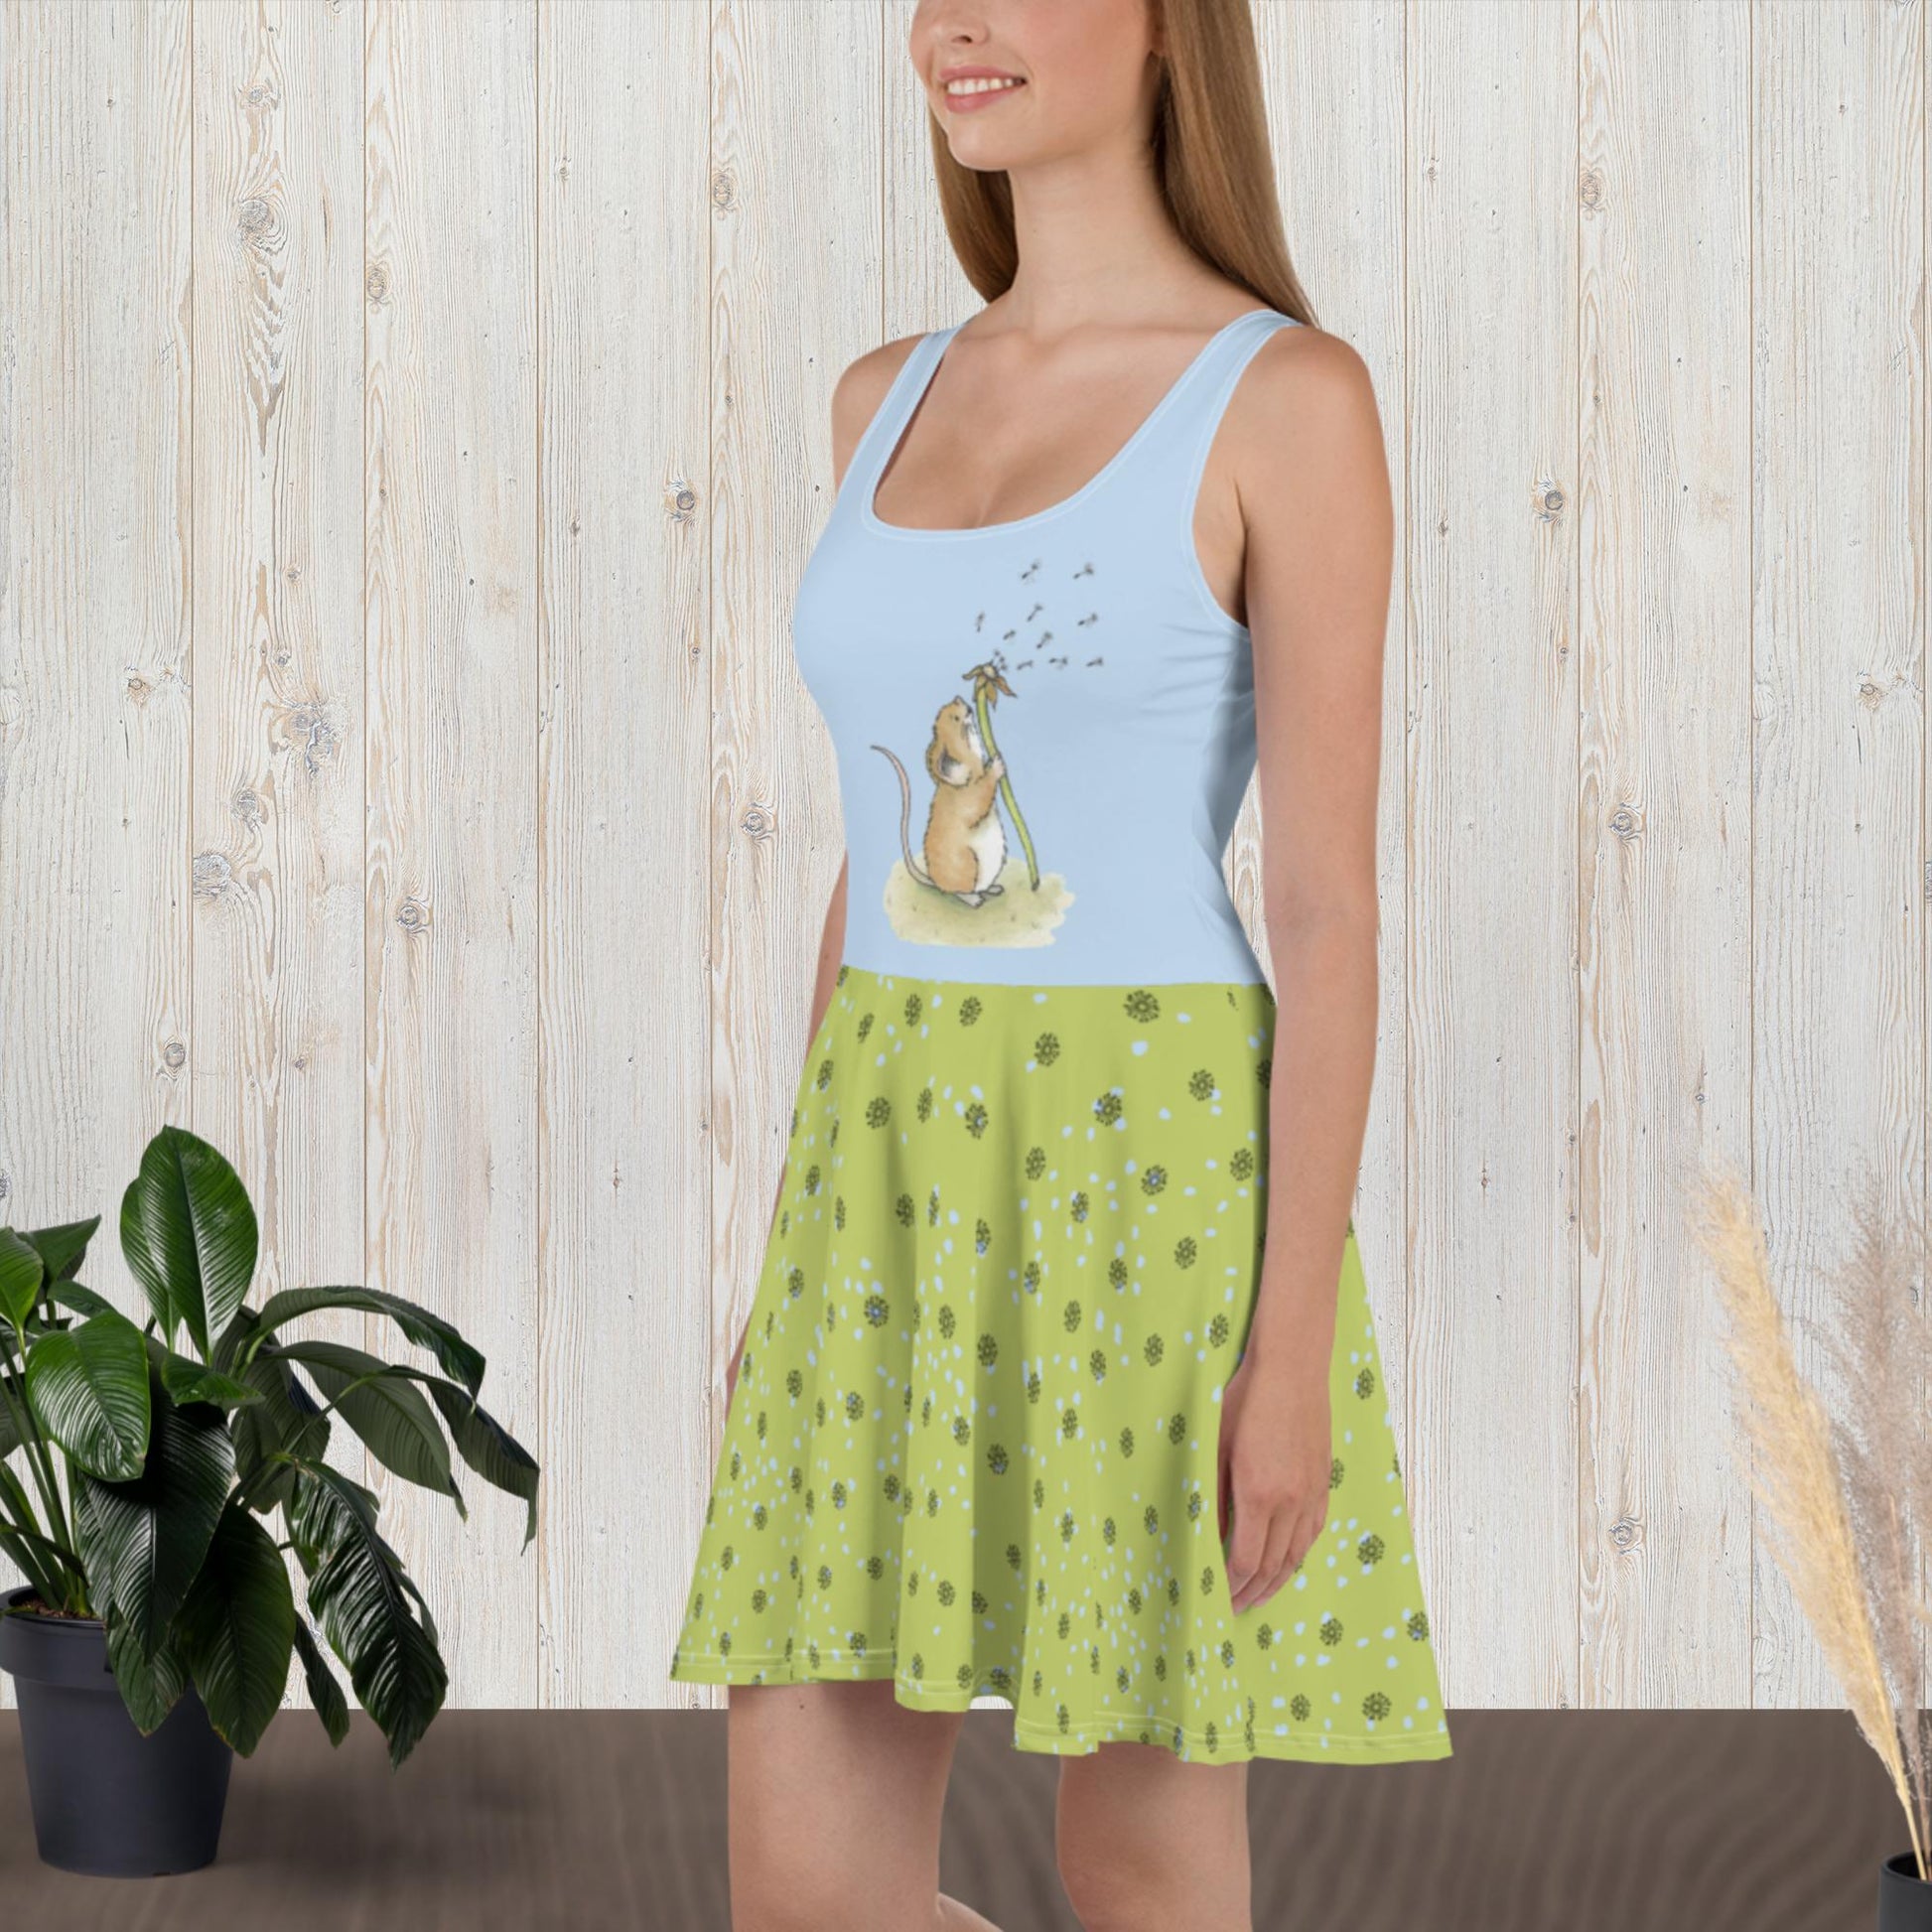 Sleeveless skater dress featuring Dandelion Wish design of a mouse making a wish on a dandelion fluff on a blue top. The mid-thigh length flared green skirt features flowers and dot details. Also has an elastic waistline. Shown on female model facing left.